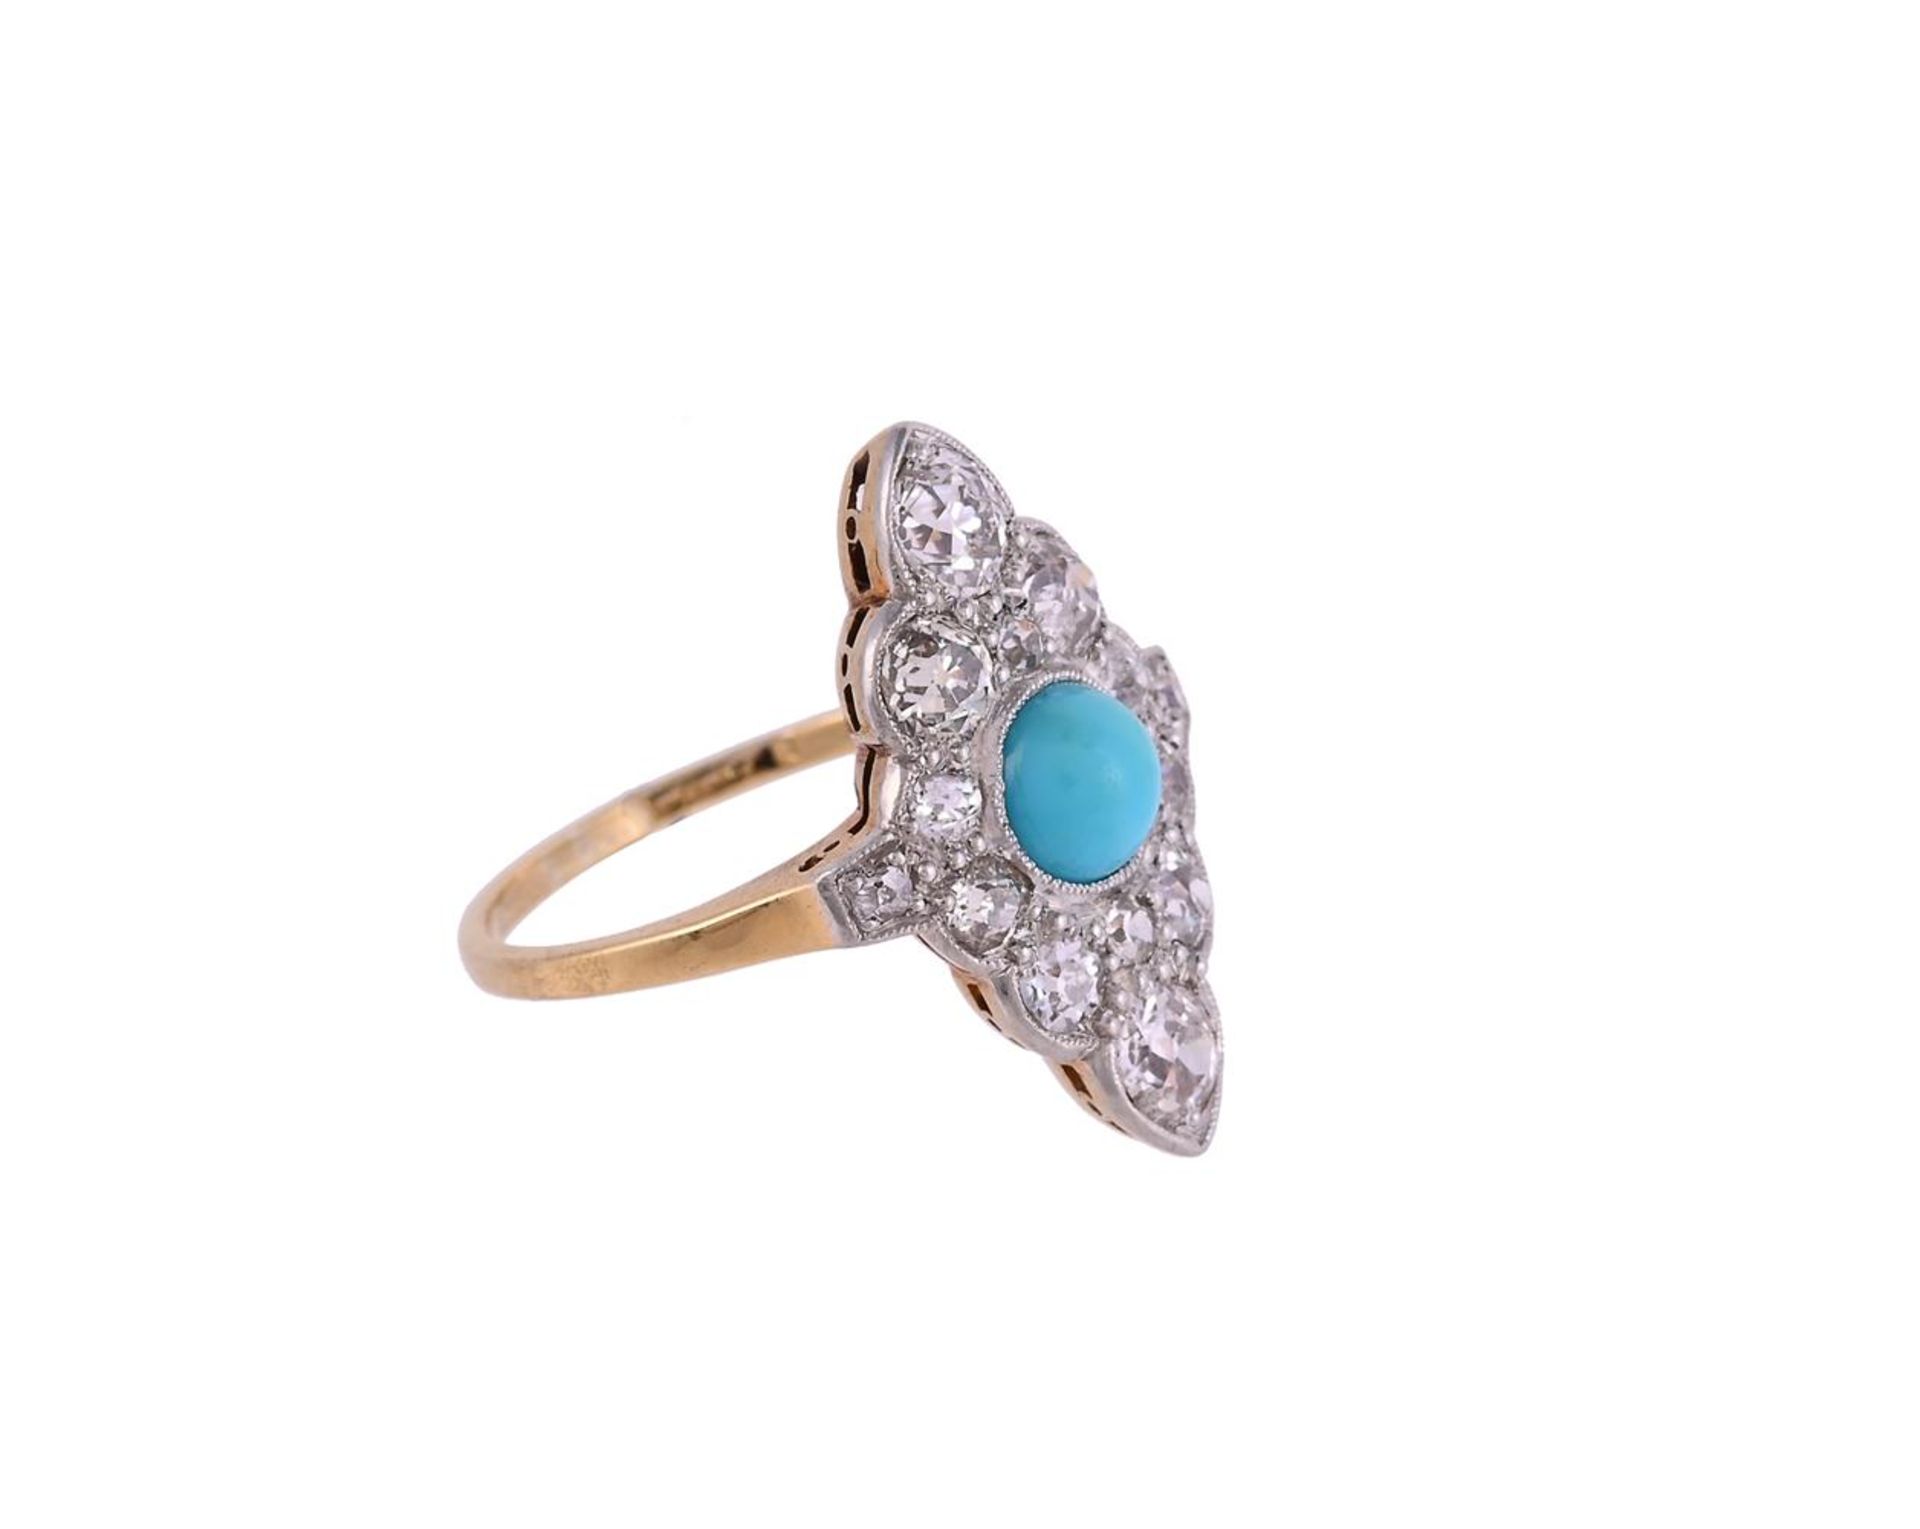 AN EARLY 20TH CENTURY DIAMOND AND TURQUOISE MARQUISE PANEL RING, CIRCA 1920 - Image 2 of 2